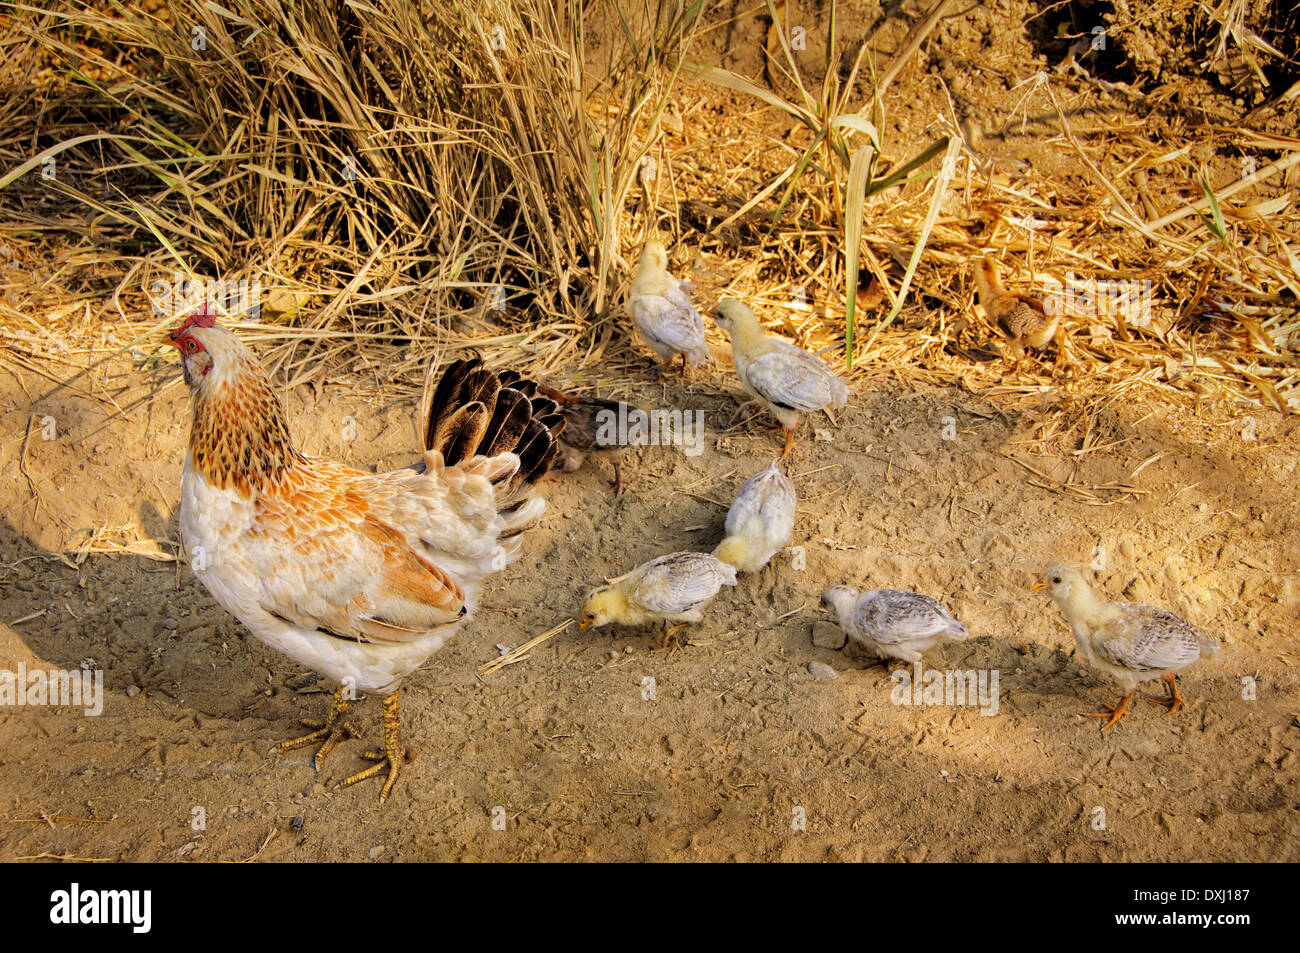 Chicks following mother hen in a dry, grassy field Stock Photo